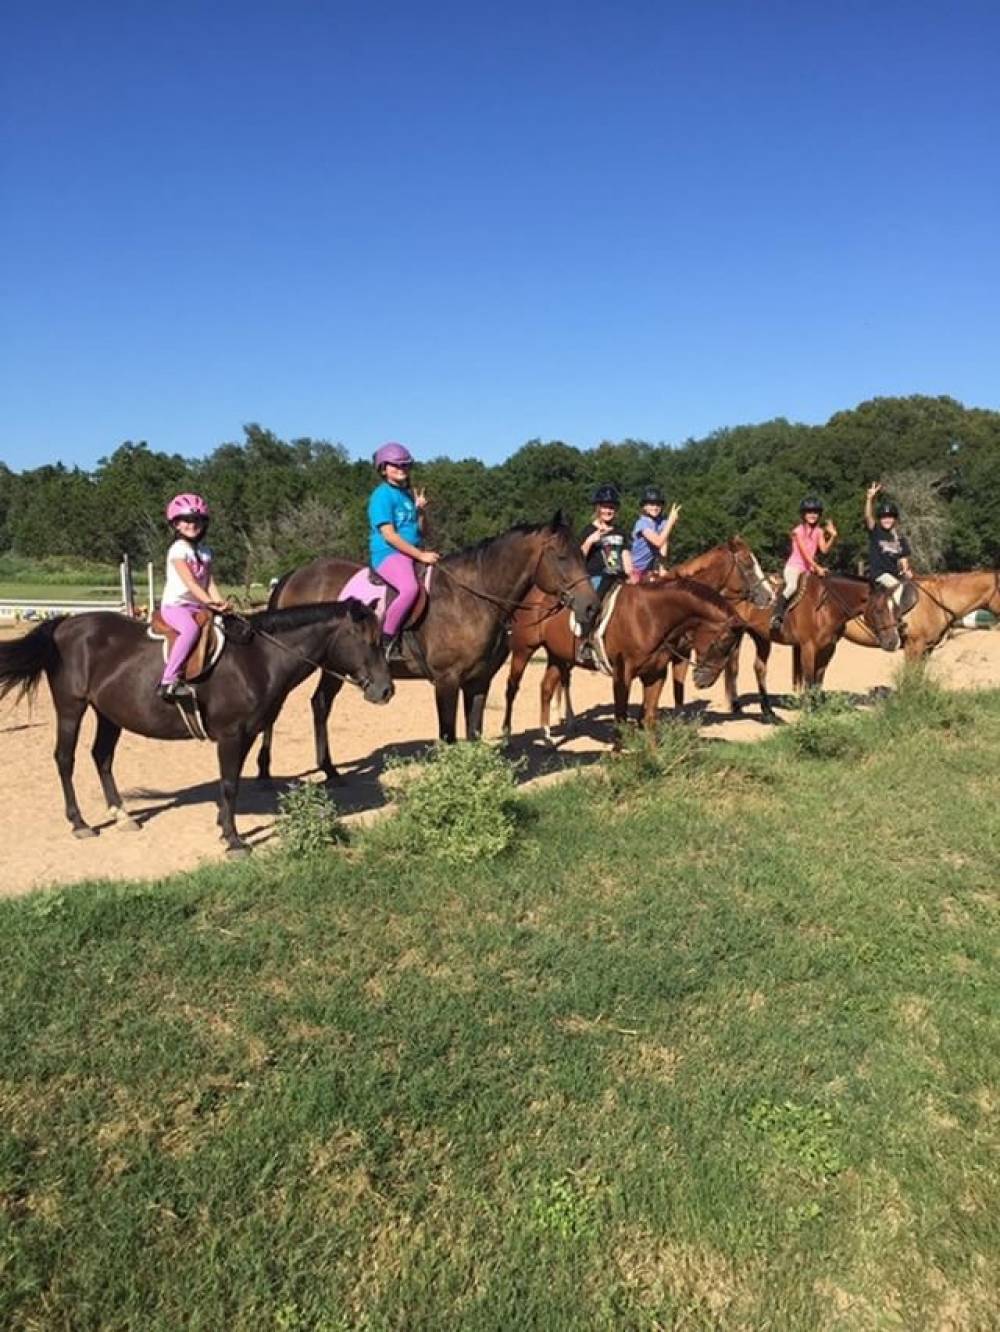 TOP TEXAS ADVENTURE CAMP: Hunters Chase Farms Inc. is a Top Adventure Summer Camp located in Wimberley Texas offering many fun and enriching Adventure and other camp programs. Hunters Chase Farms Inc. also offers CIT/LIT and/or Teen Leadership Opportunities, too.